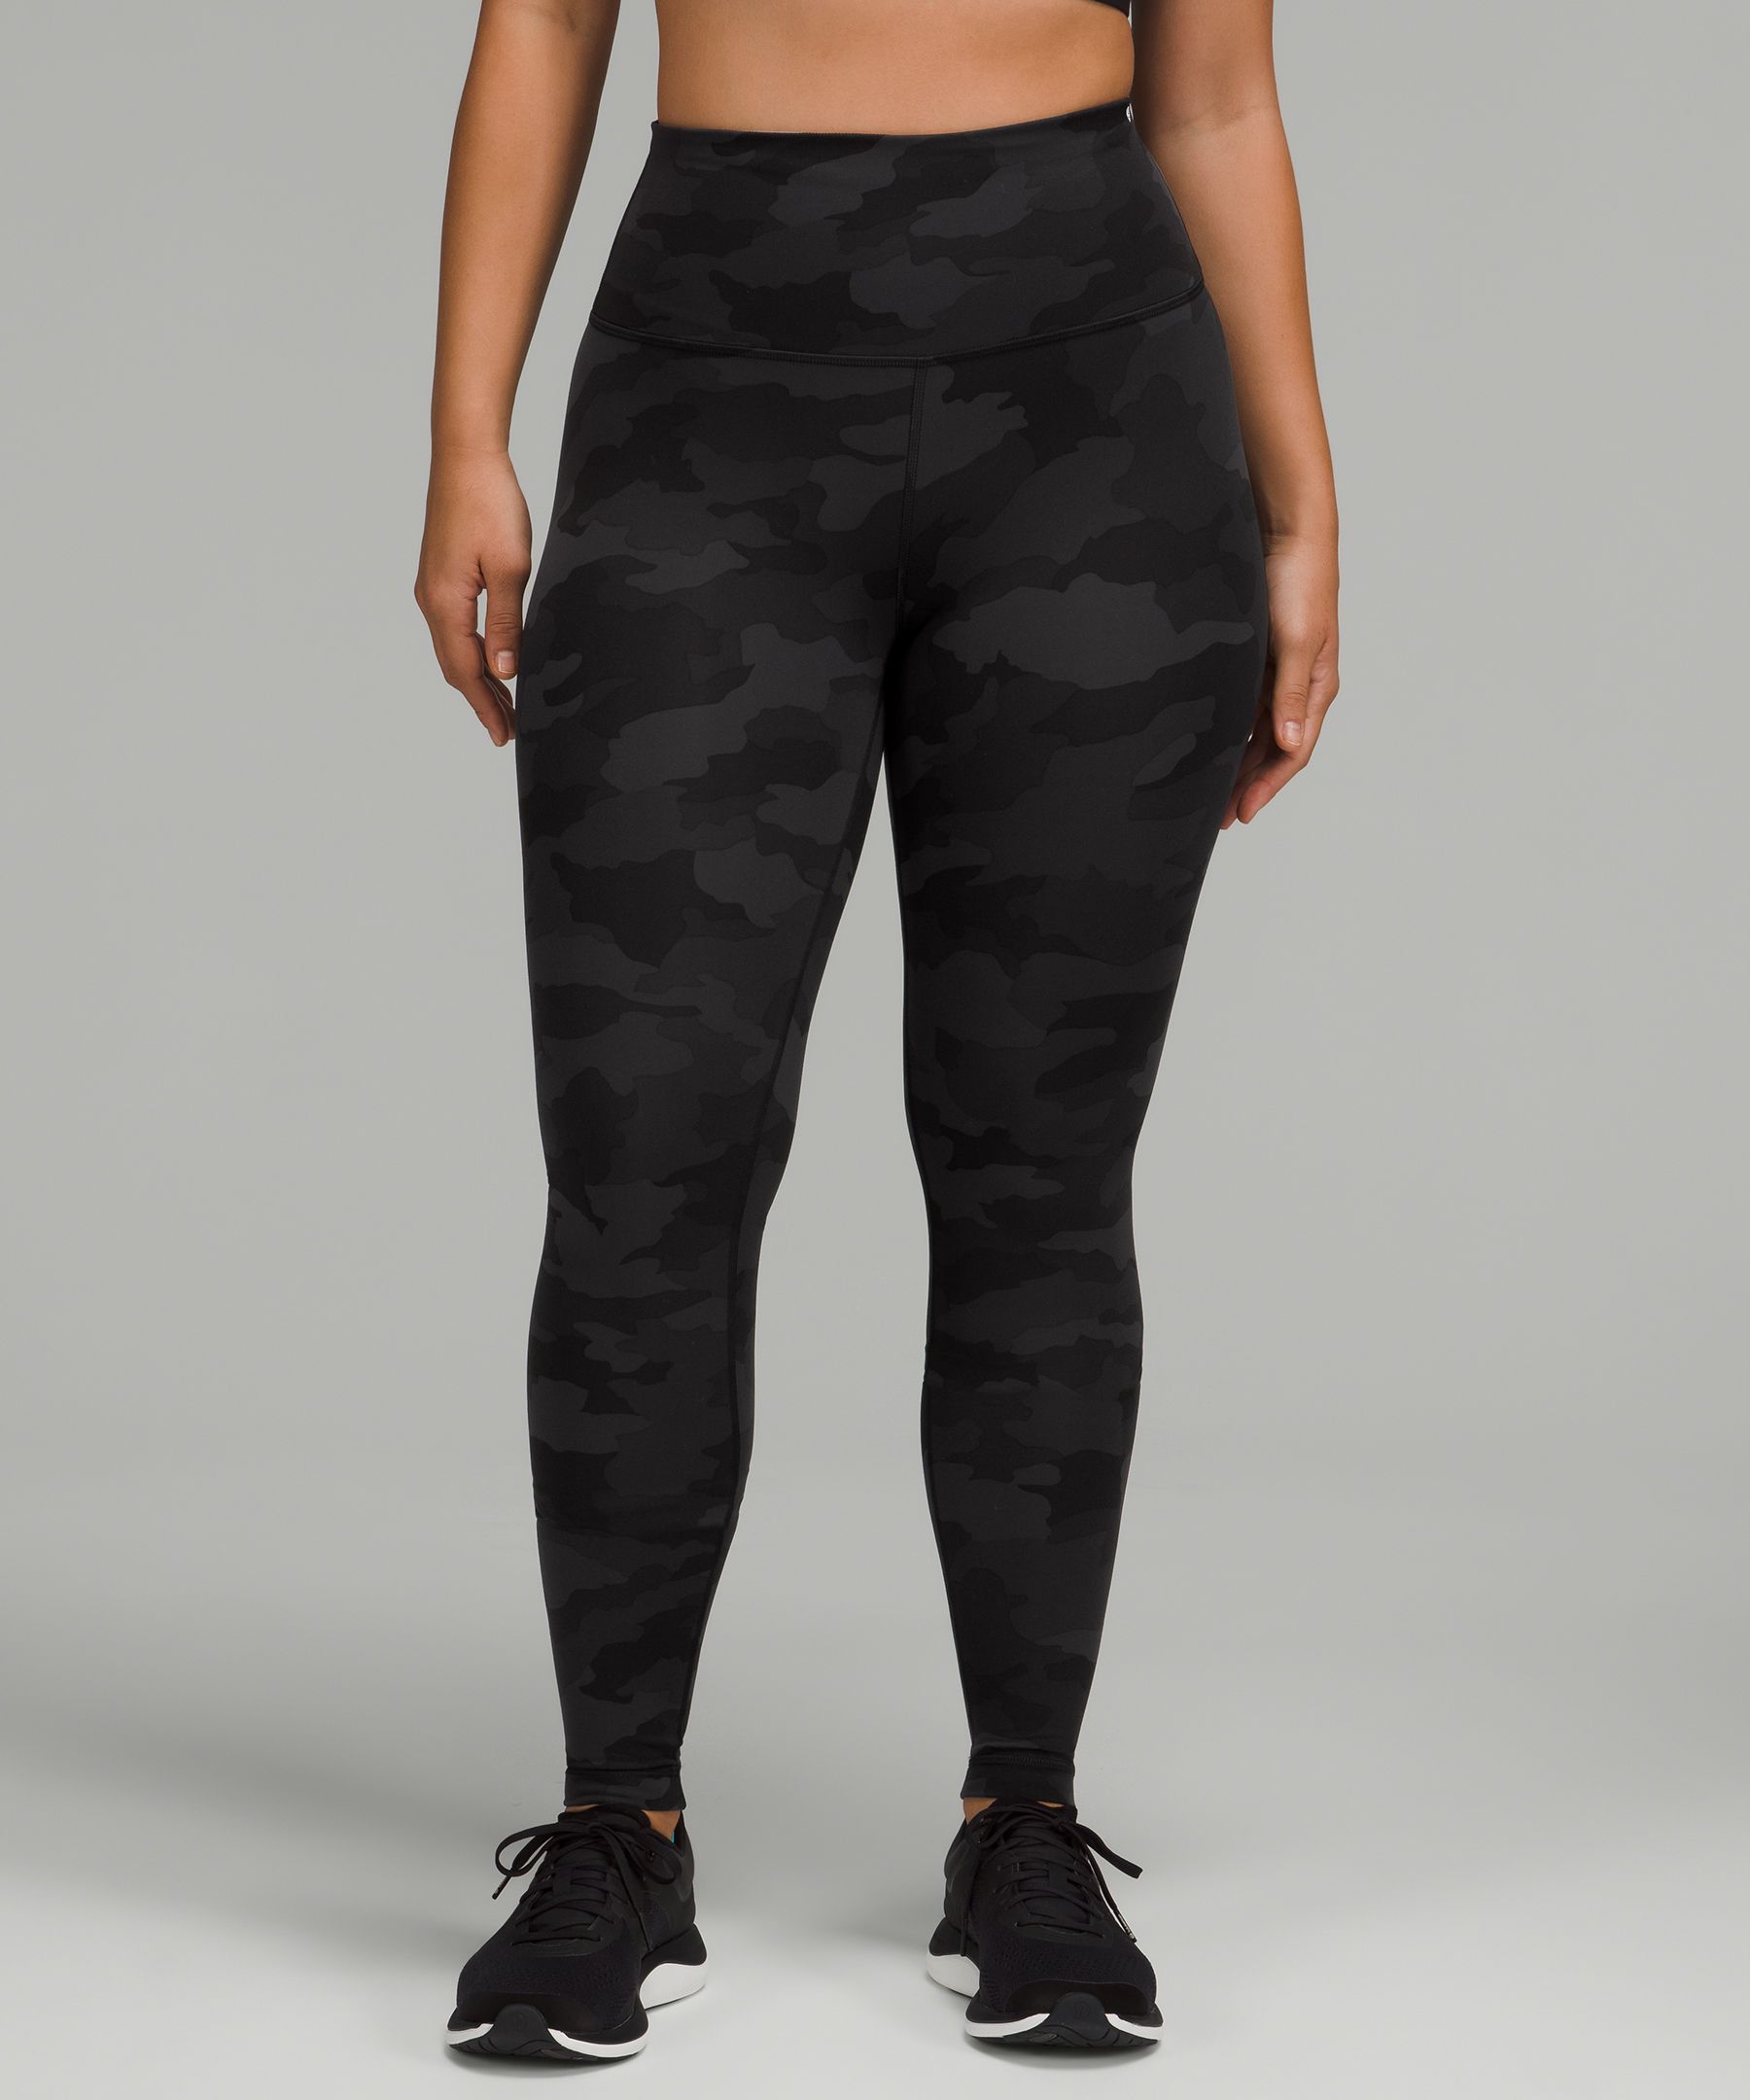 Lululemon Wunder Train Contour Fit High-rise Tights 28" In Heritage 365 Camo Deep Coal